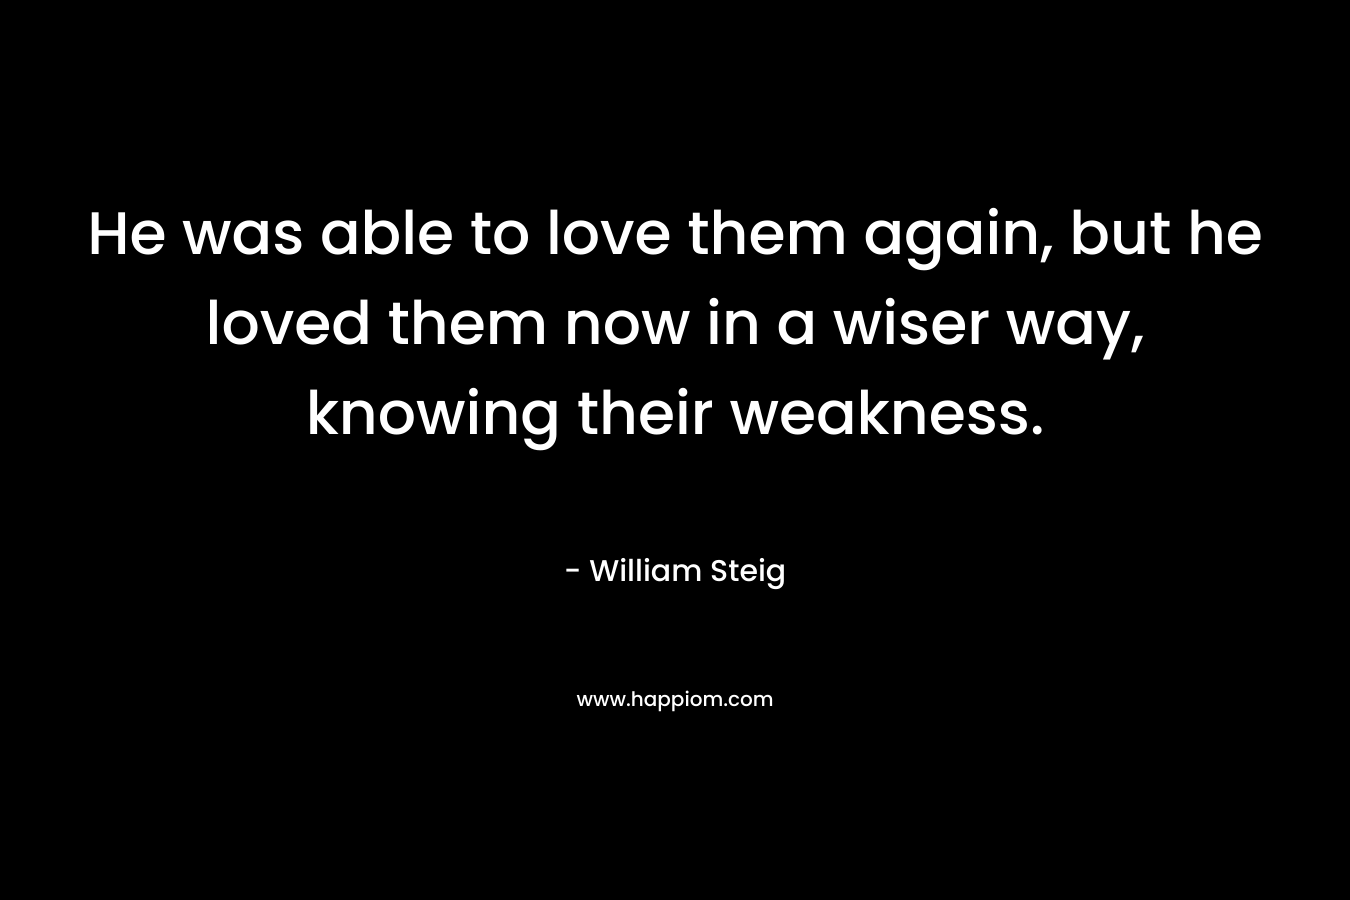 He was able to love them again, but he loved them now in a wiser way, knowing their weakness.